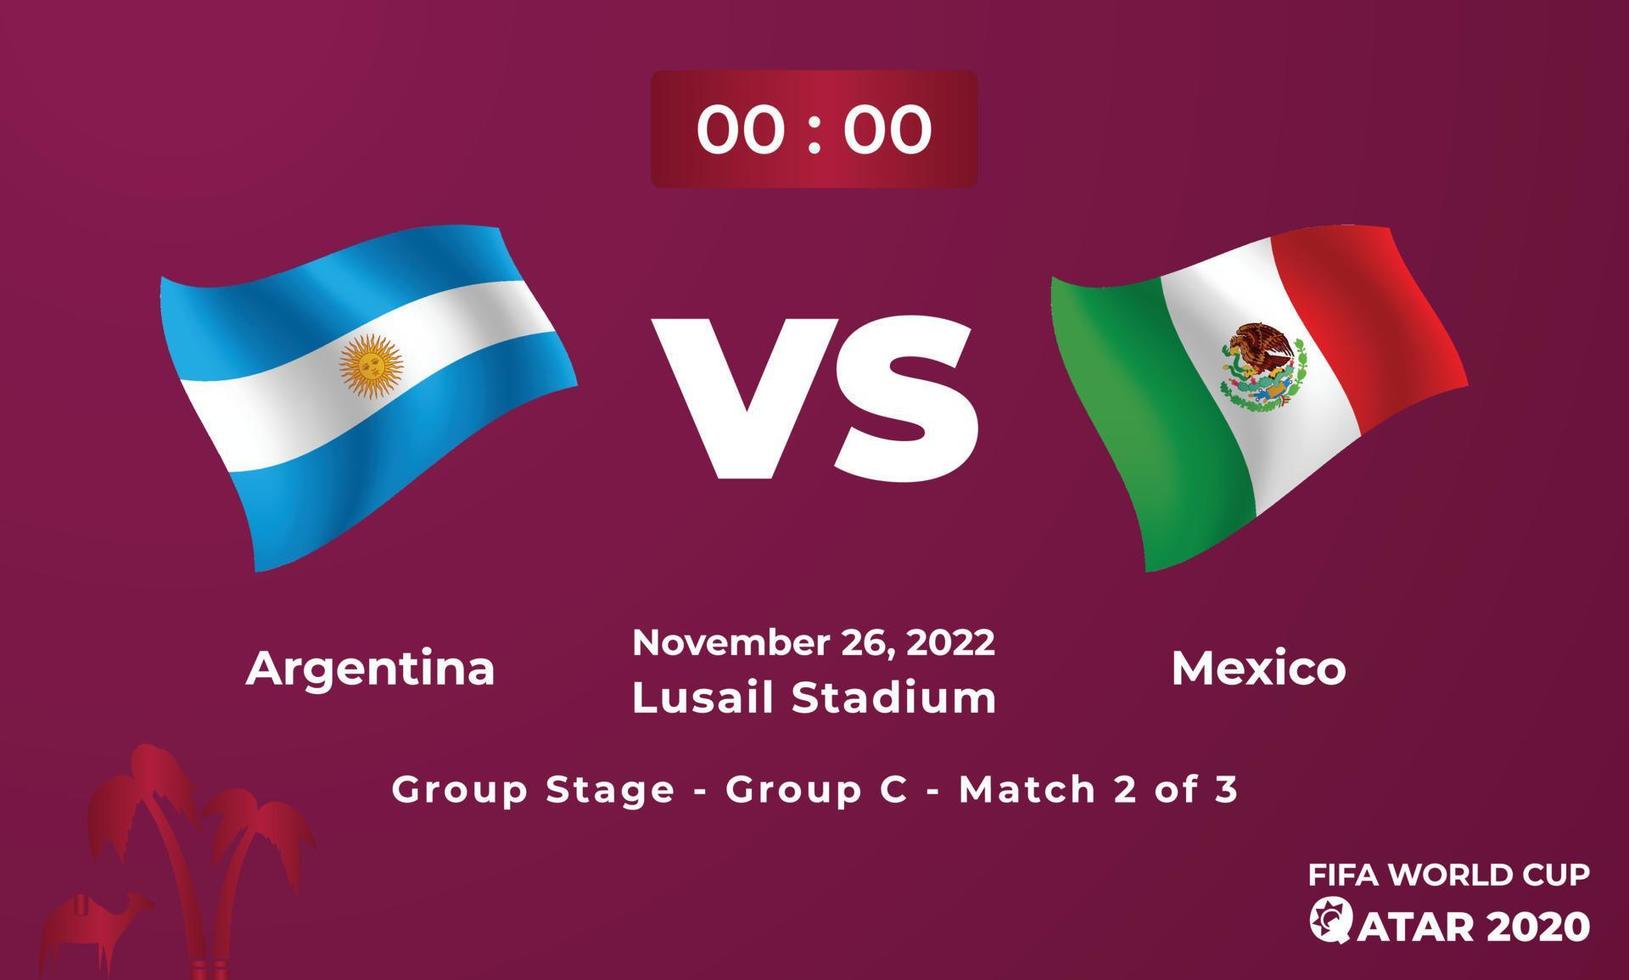 Argentina VS Mexico Football MatchTemplate, FIFA World Cup in Qatar 2022 vector